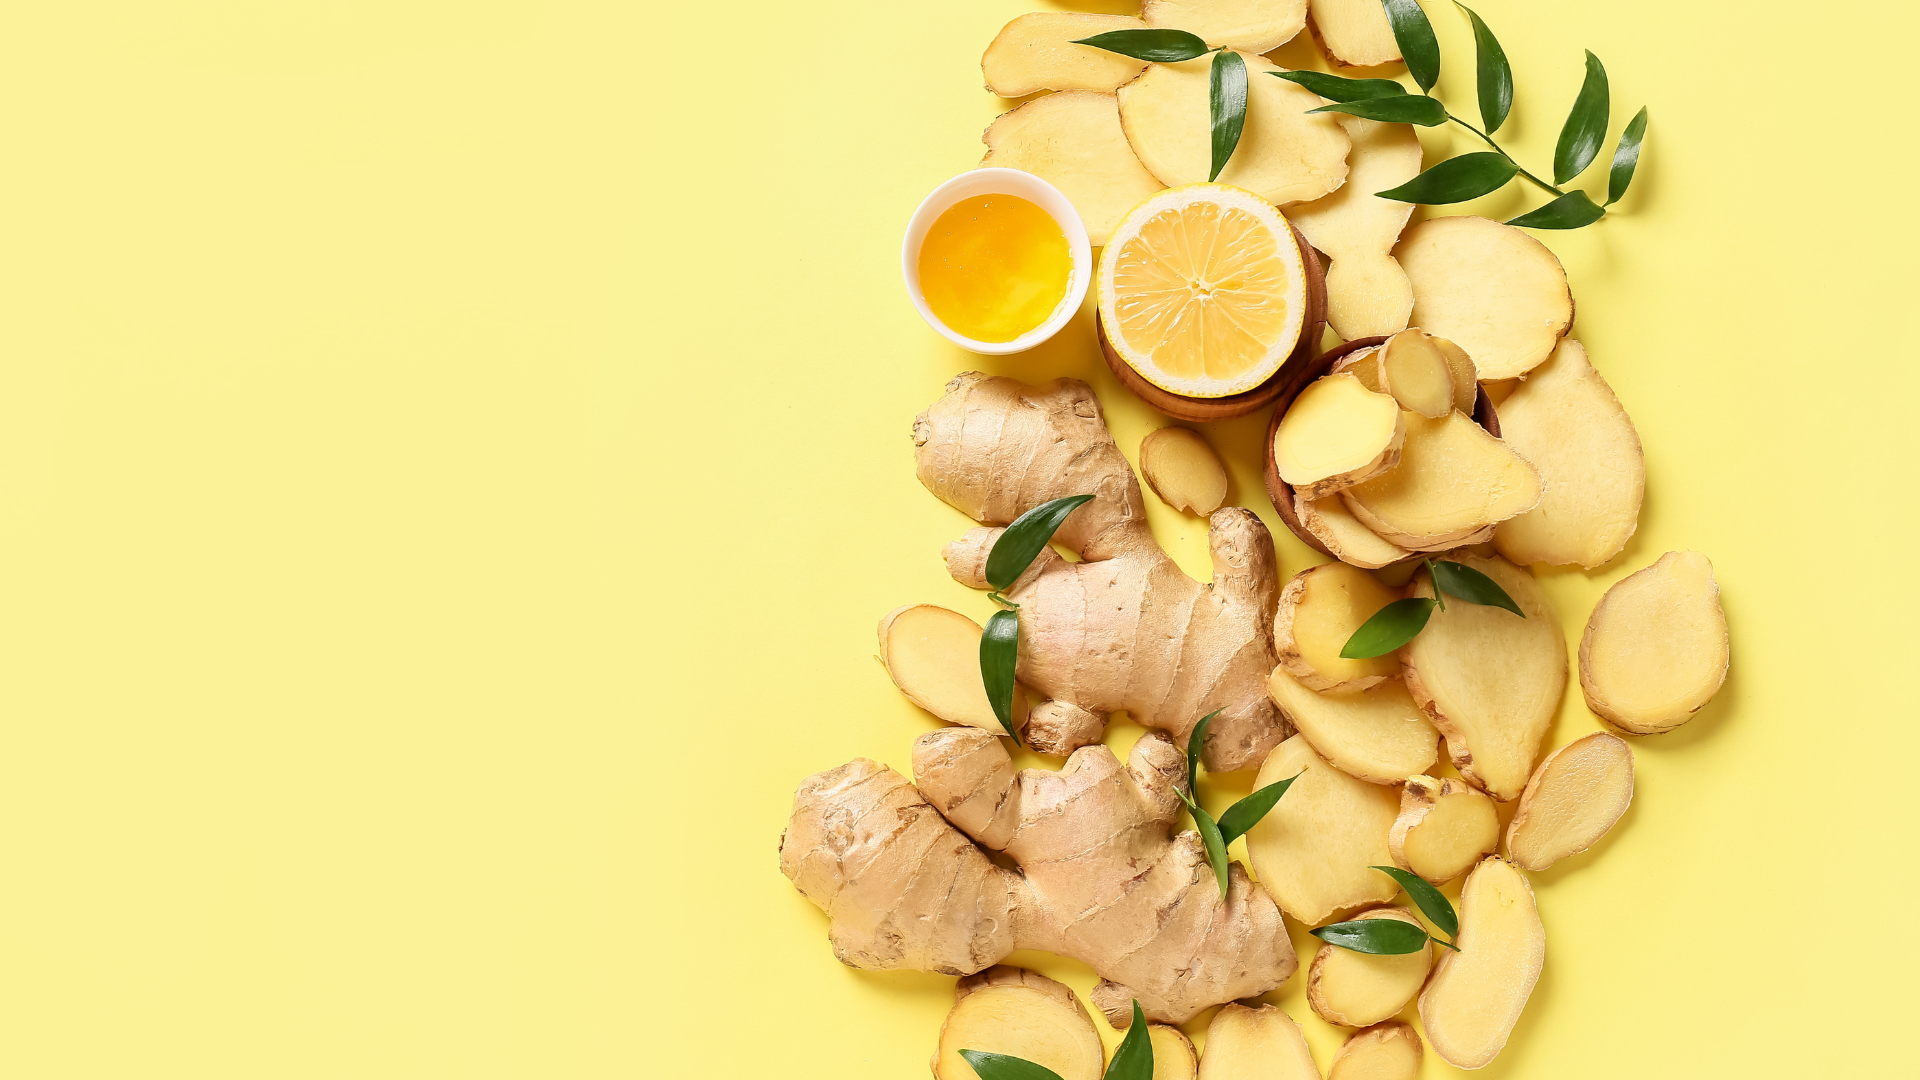 How to Use Ginger to Lose Weight